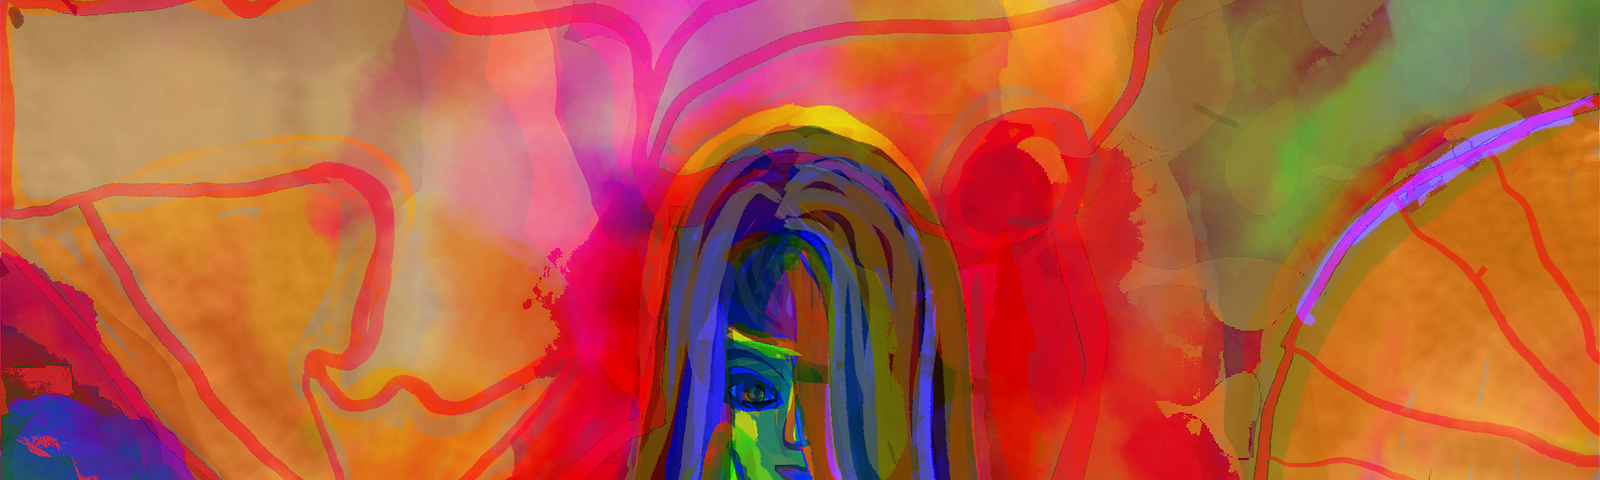 A vibrant, colorful painting of a woman. The woman is made of strokes of green, blue, yellow, green, and red. She is beautiful.